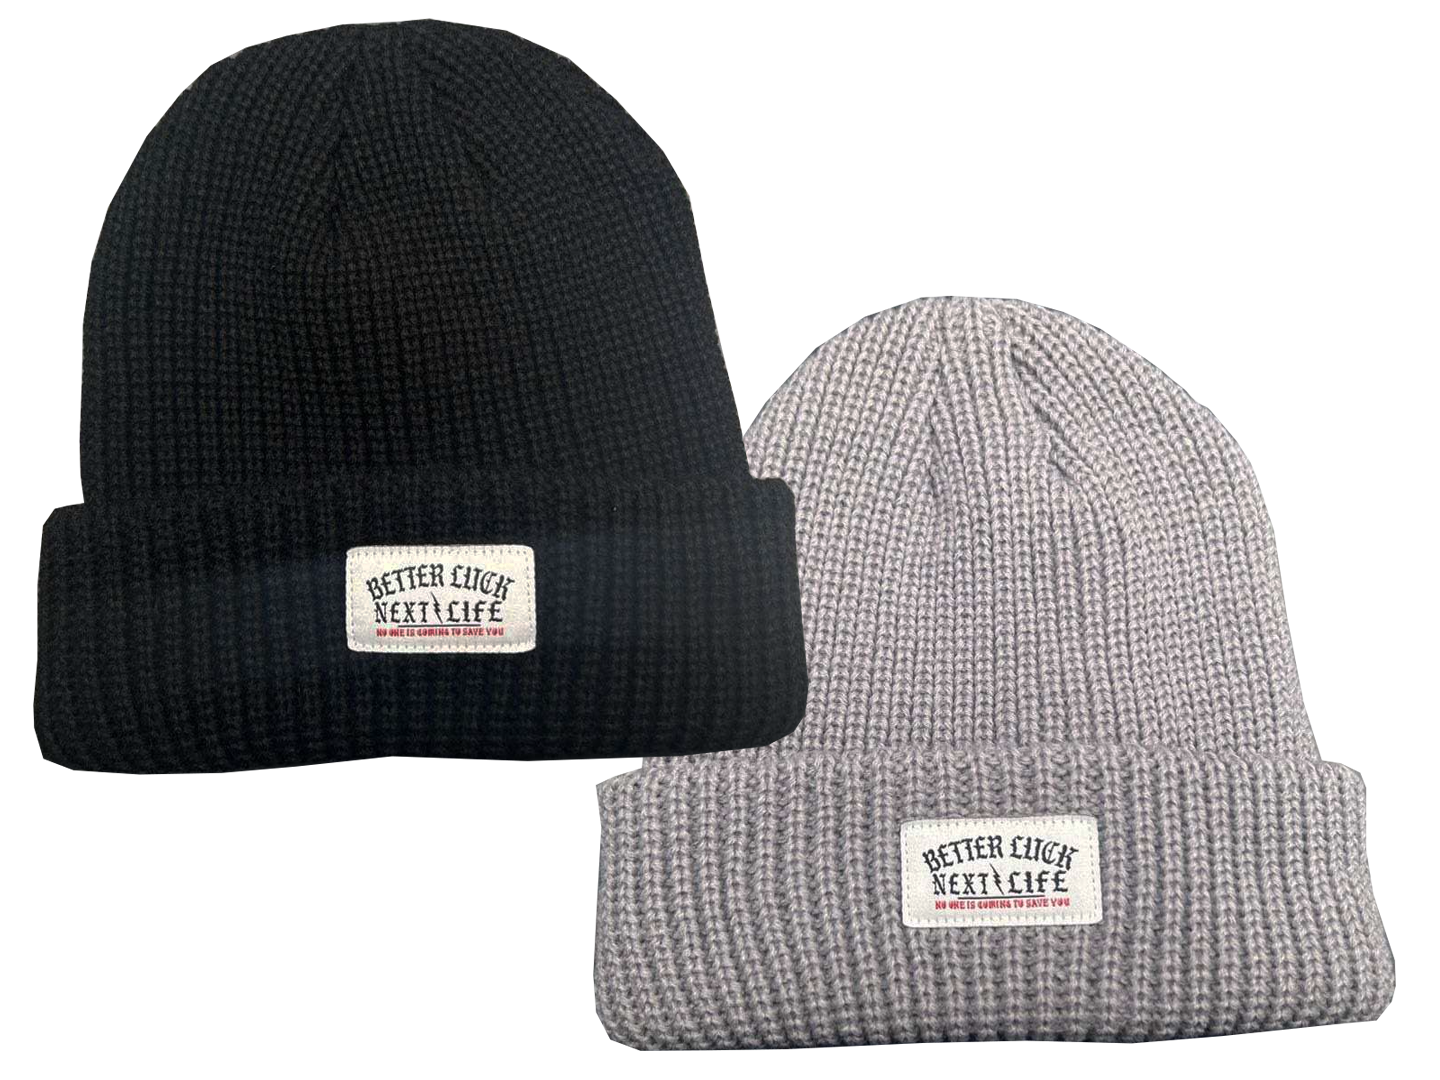 » BETTER LUCK NEXT LIFE "NO ONE IS COMING TO SAVE YOU" BEANIES (100% off)